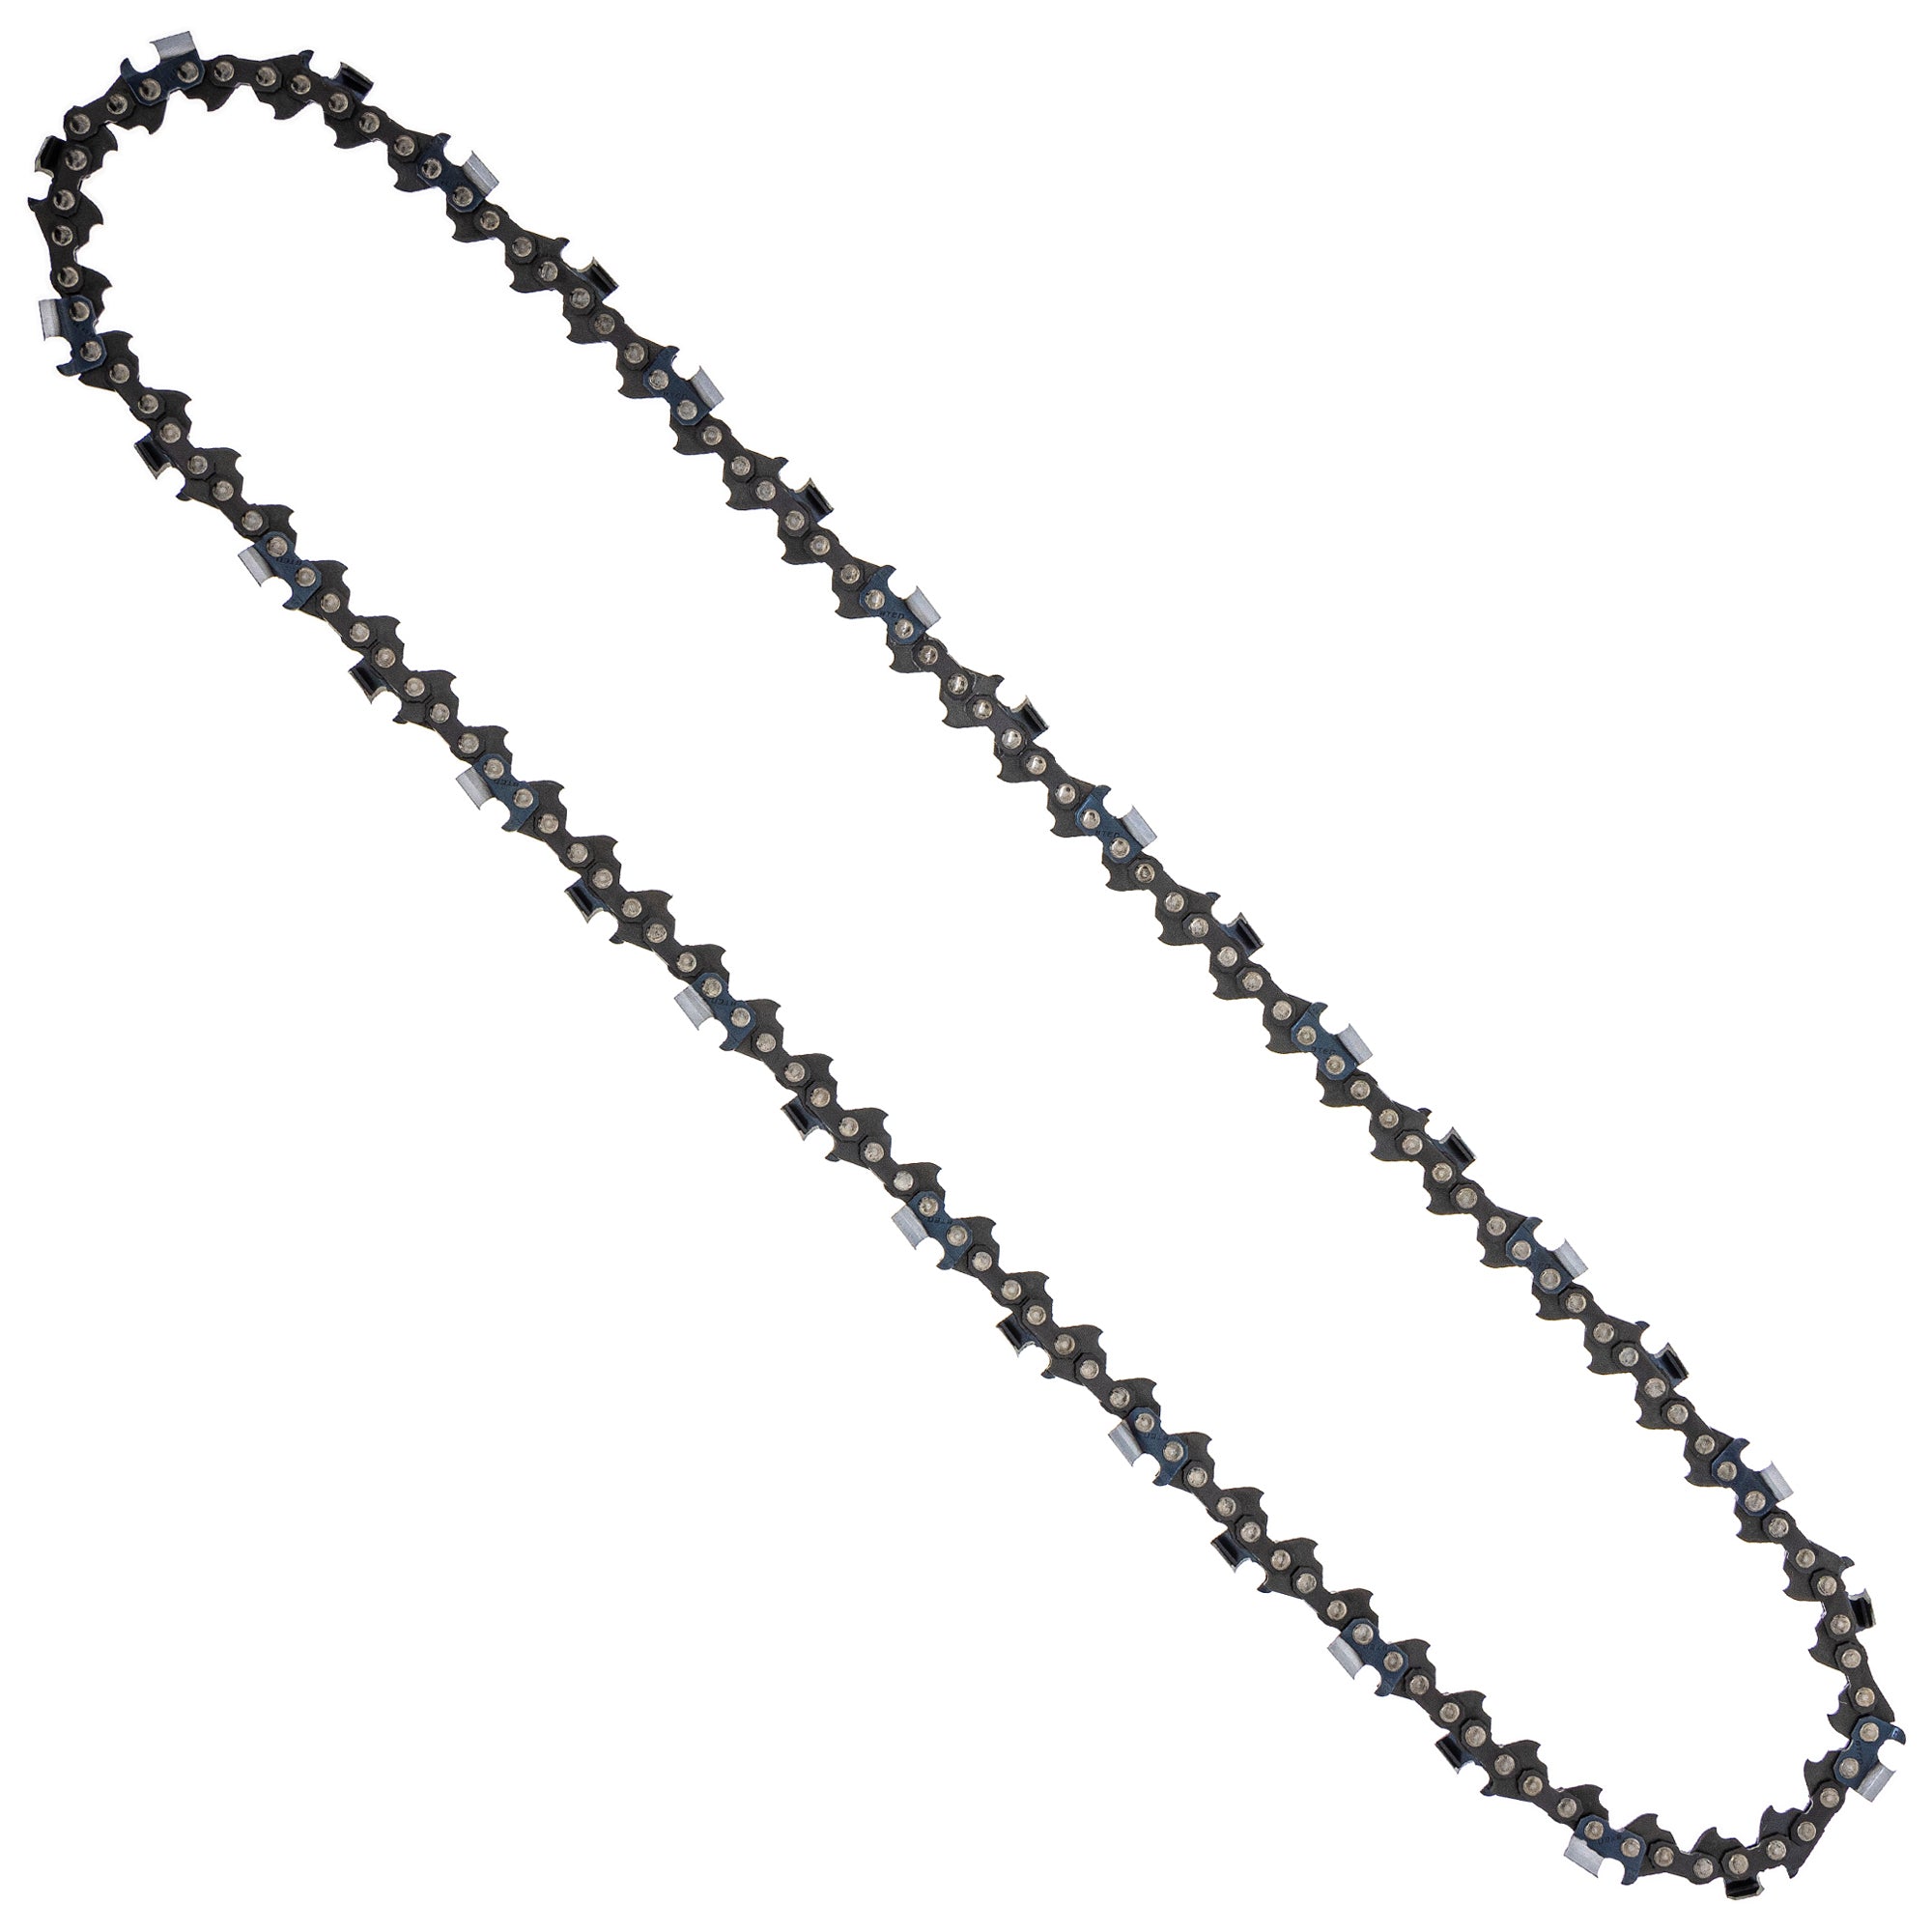 8TEN 810-CCC2218H Chain 3-Pack for zOTHER Oregon Husqvarna Poulan